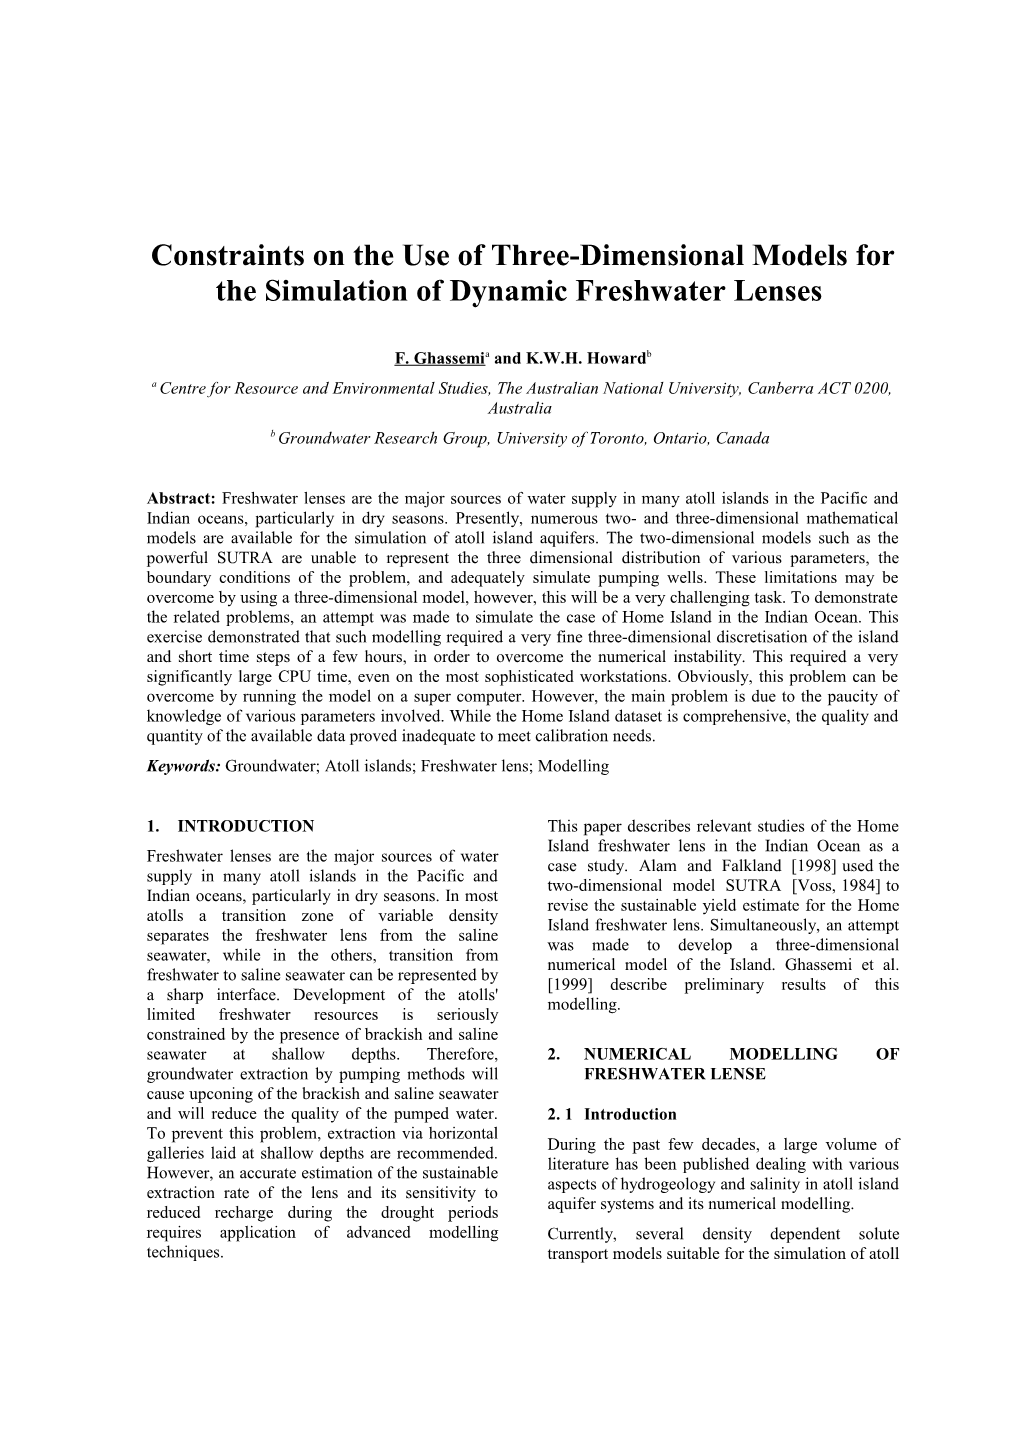 Constraints on the Use of Three-Dimensional Models for the Simulation of Dynamic Freshwater